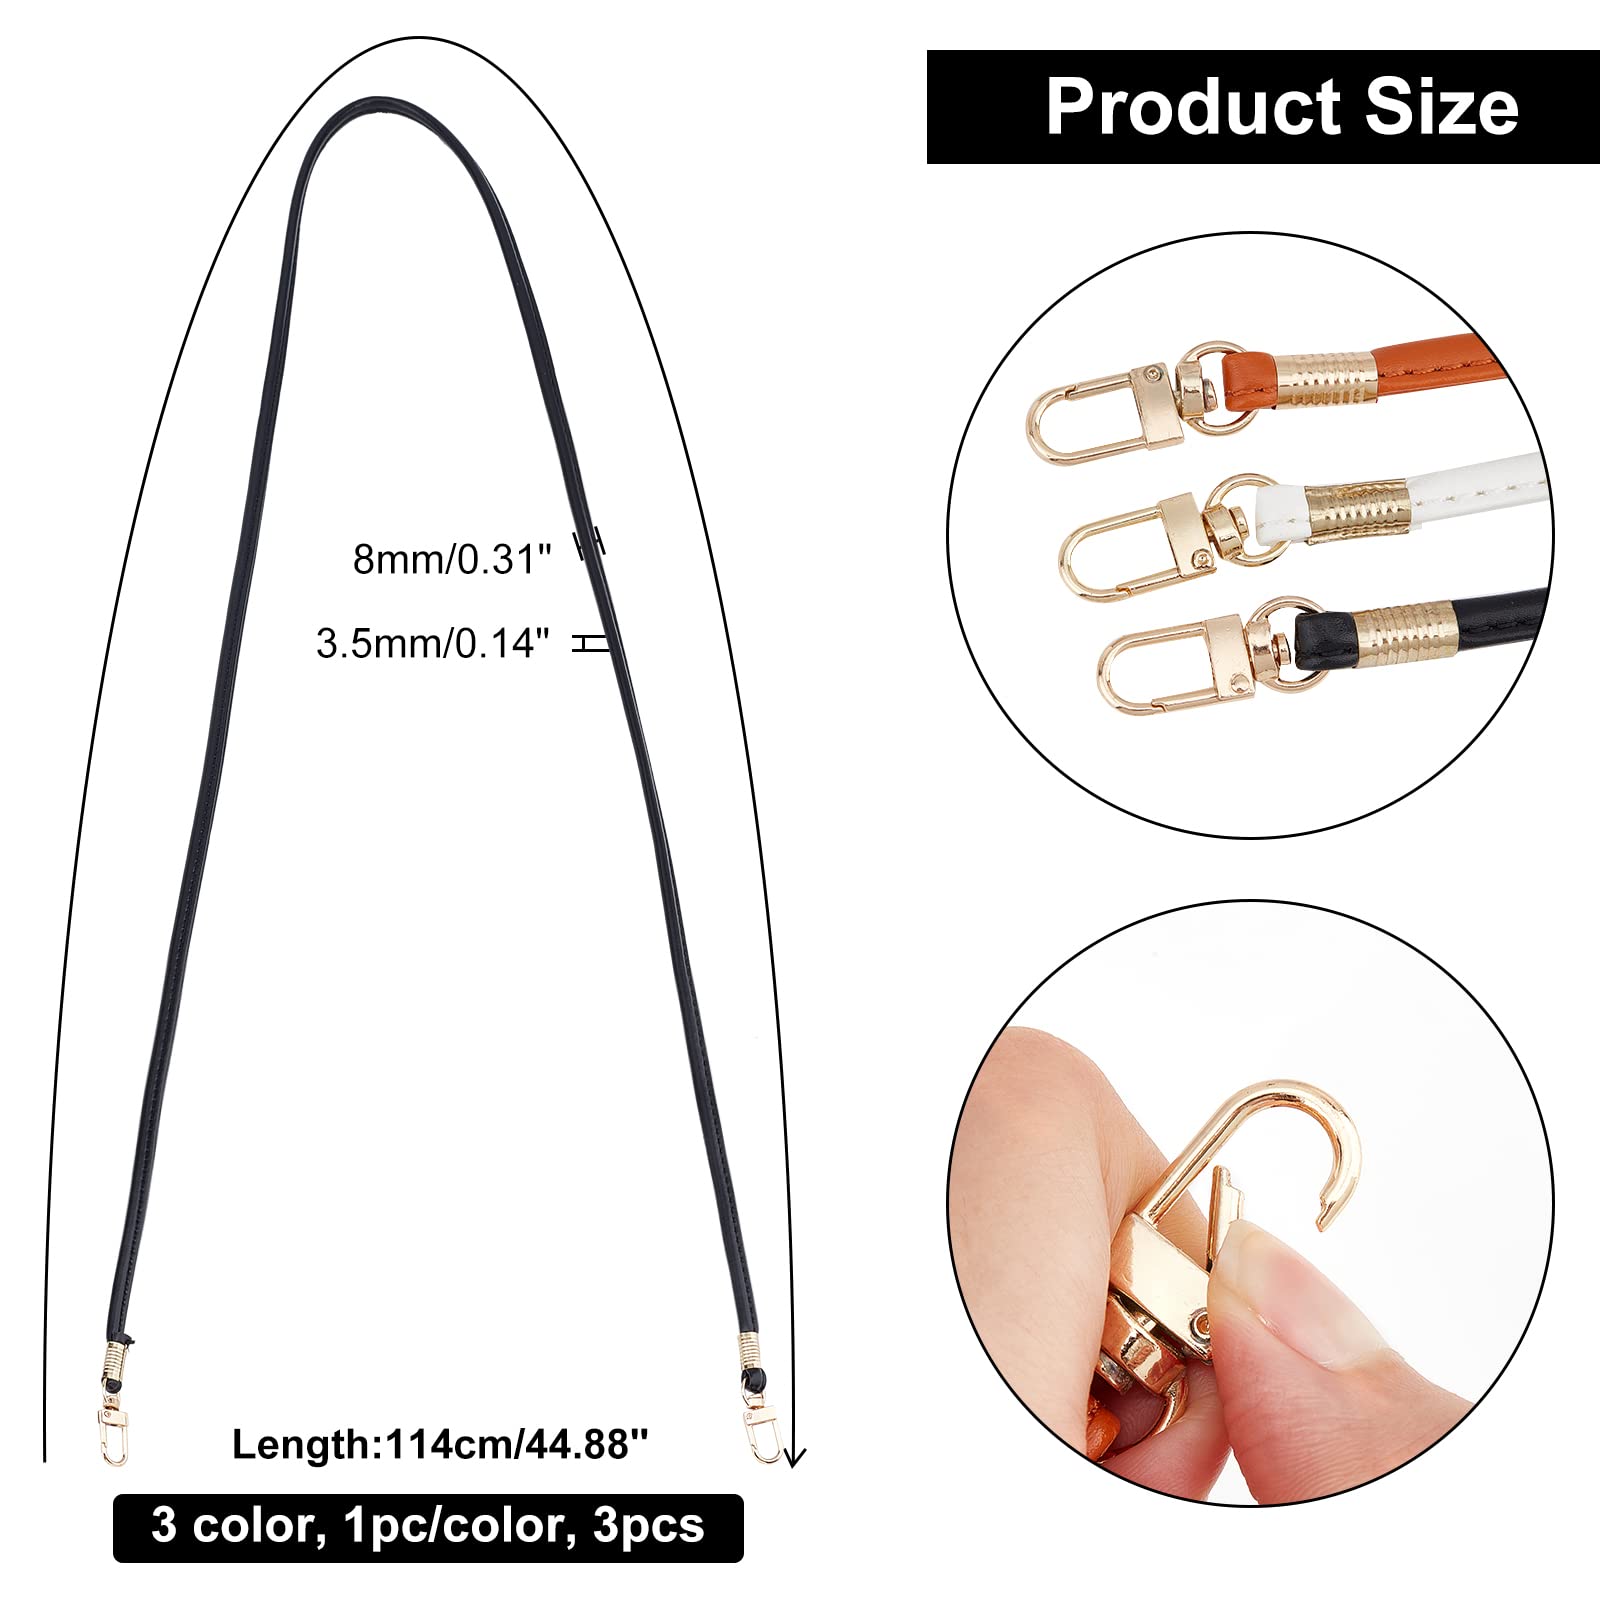 SUPERFINDINGS 3 Colors Leather Crossbody Strap Long Thin Soft Replacement Purse Straps 44.88 in Imitation Leather Bag Strap with Gold Swivel Clasps for Small Bag Purse Wallet Clutch Phone Case